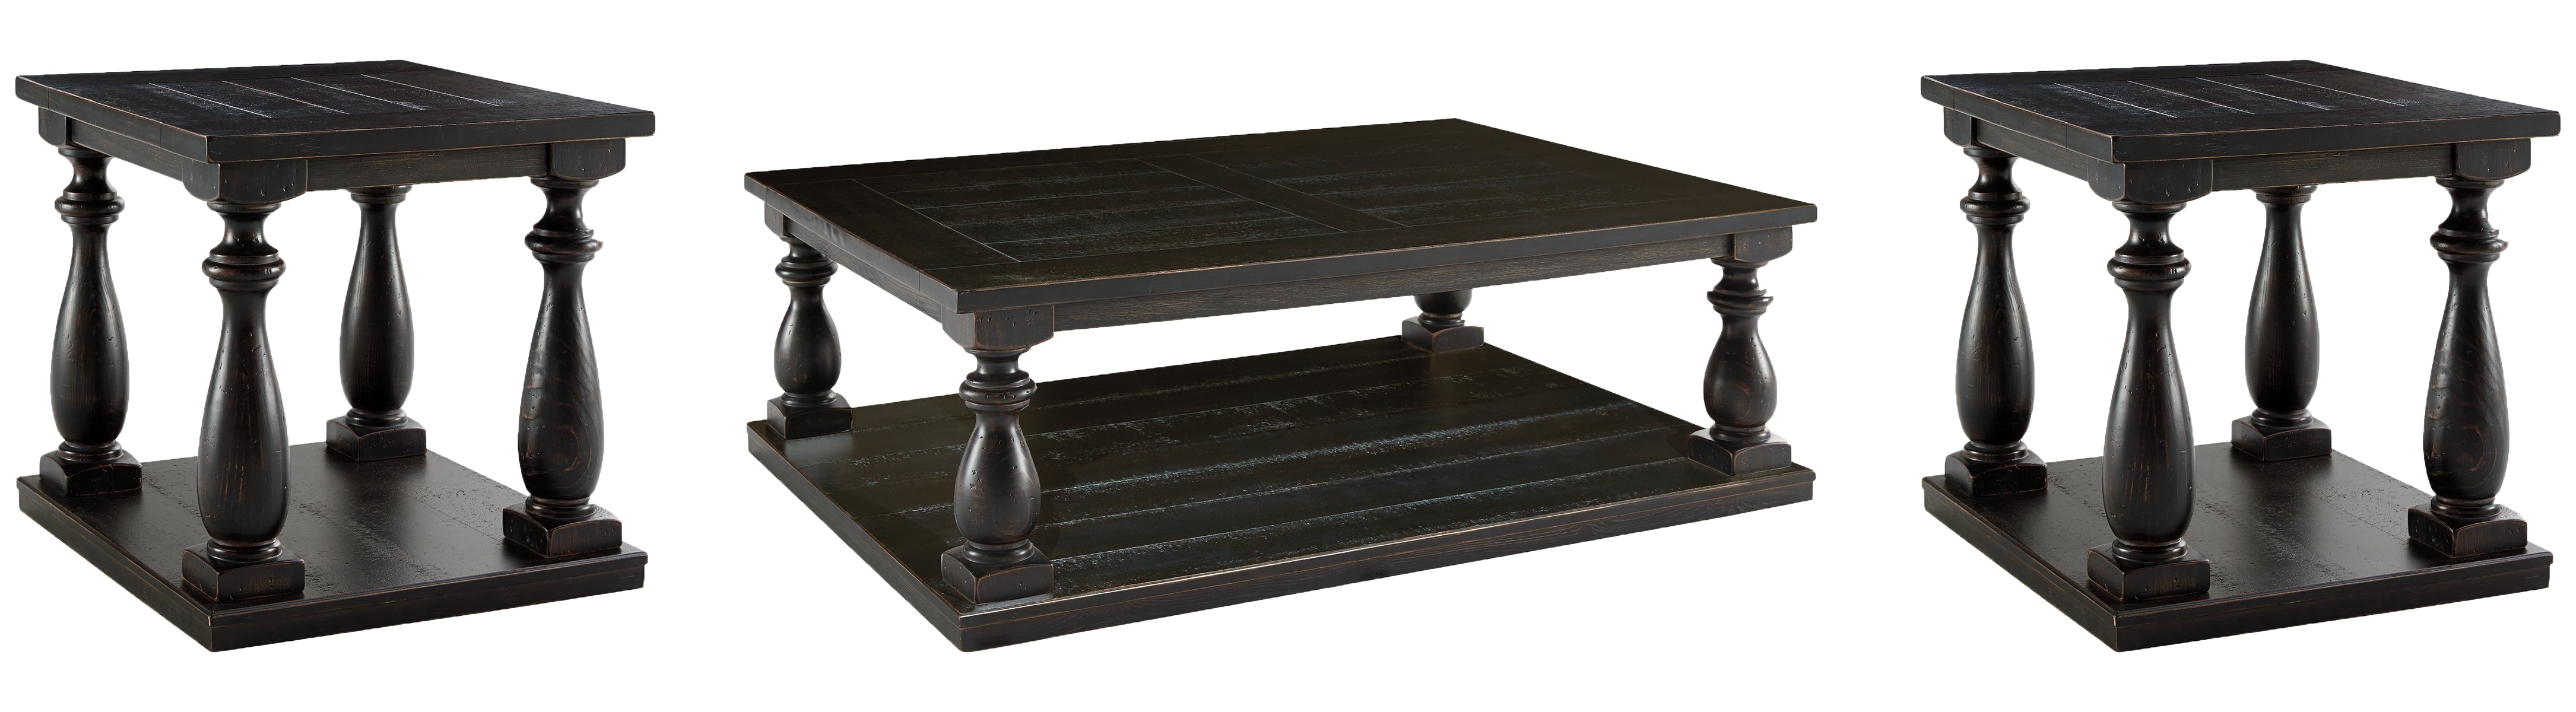 Mallacar Coffee Table with 2 End Tables